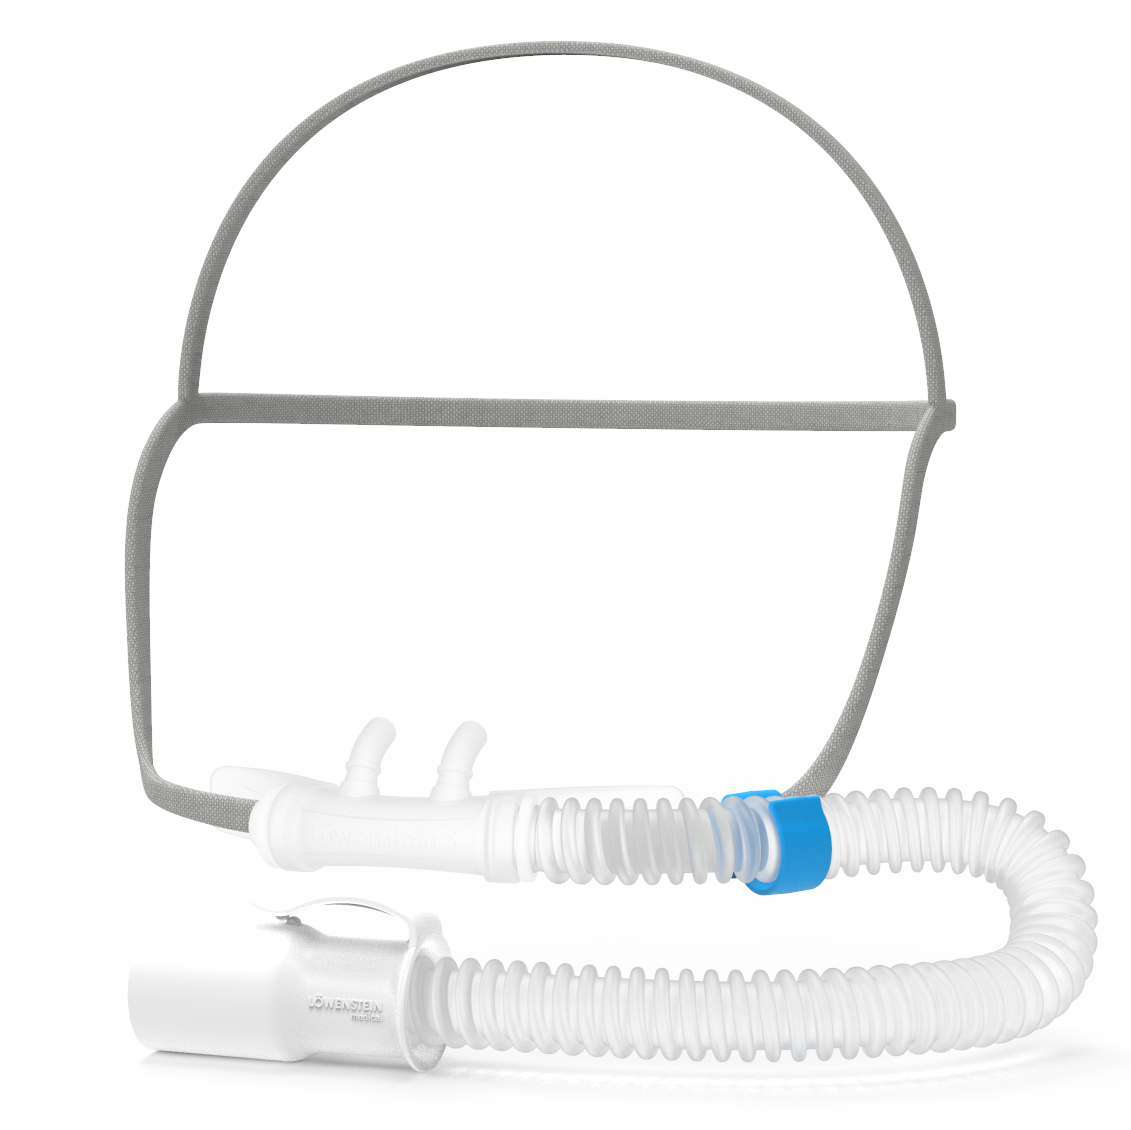 lmflo2 clinic mask patient interface nasal cannula m